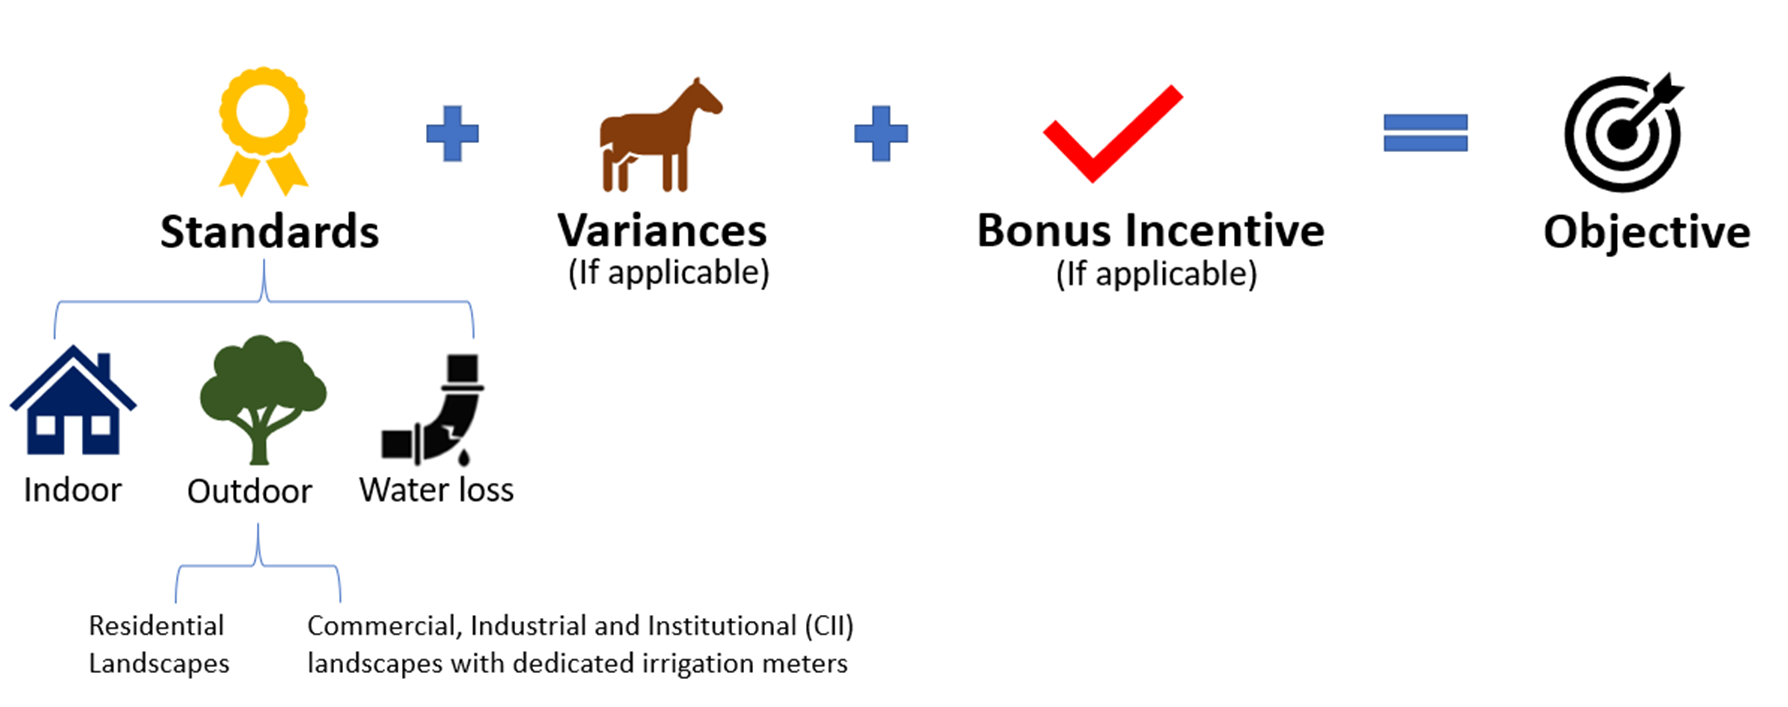 An equation made up of three elements, a ribbon for Standards, A horse for Variances and a red checkmark for Bonus Incentive if applicable, summed together to equal the Objective, shown as an arrow hitting an archery target. The Yellow Standards ribbon is split into three sub-items, Indoor, Outdoor and Water Loss, symbolized by a home, a tree and a leaky water pipe. Outdoor Standards is further split into Residential Landscapes and Commercial, Industrial and Institutional (CII) landscapes with dedicated irrigation meters.